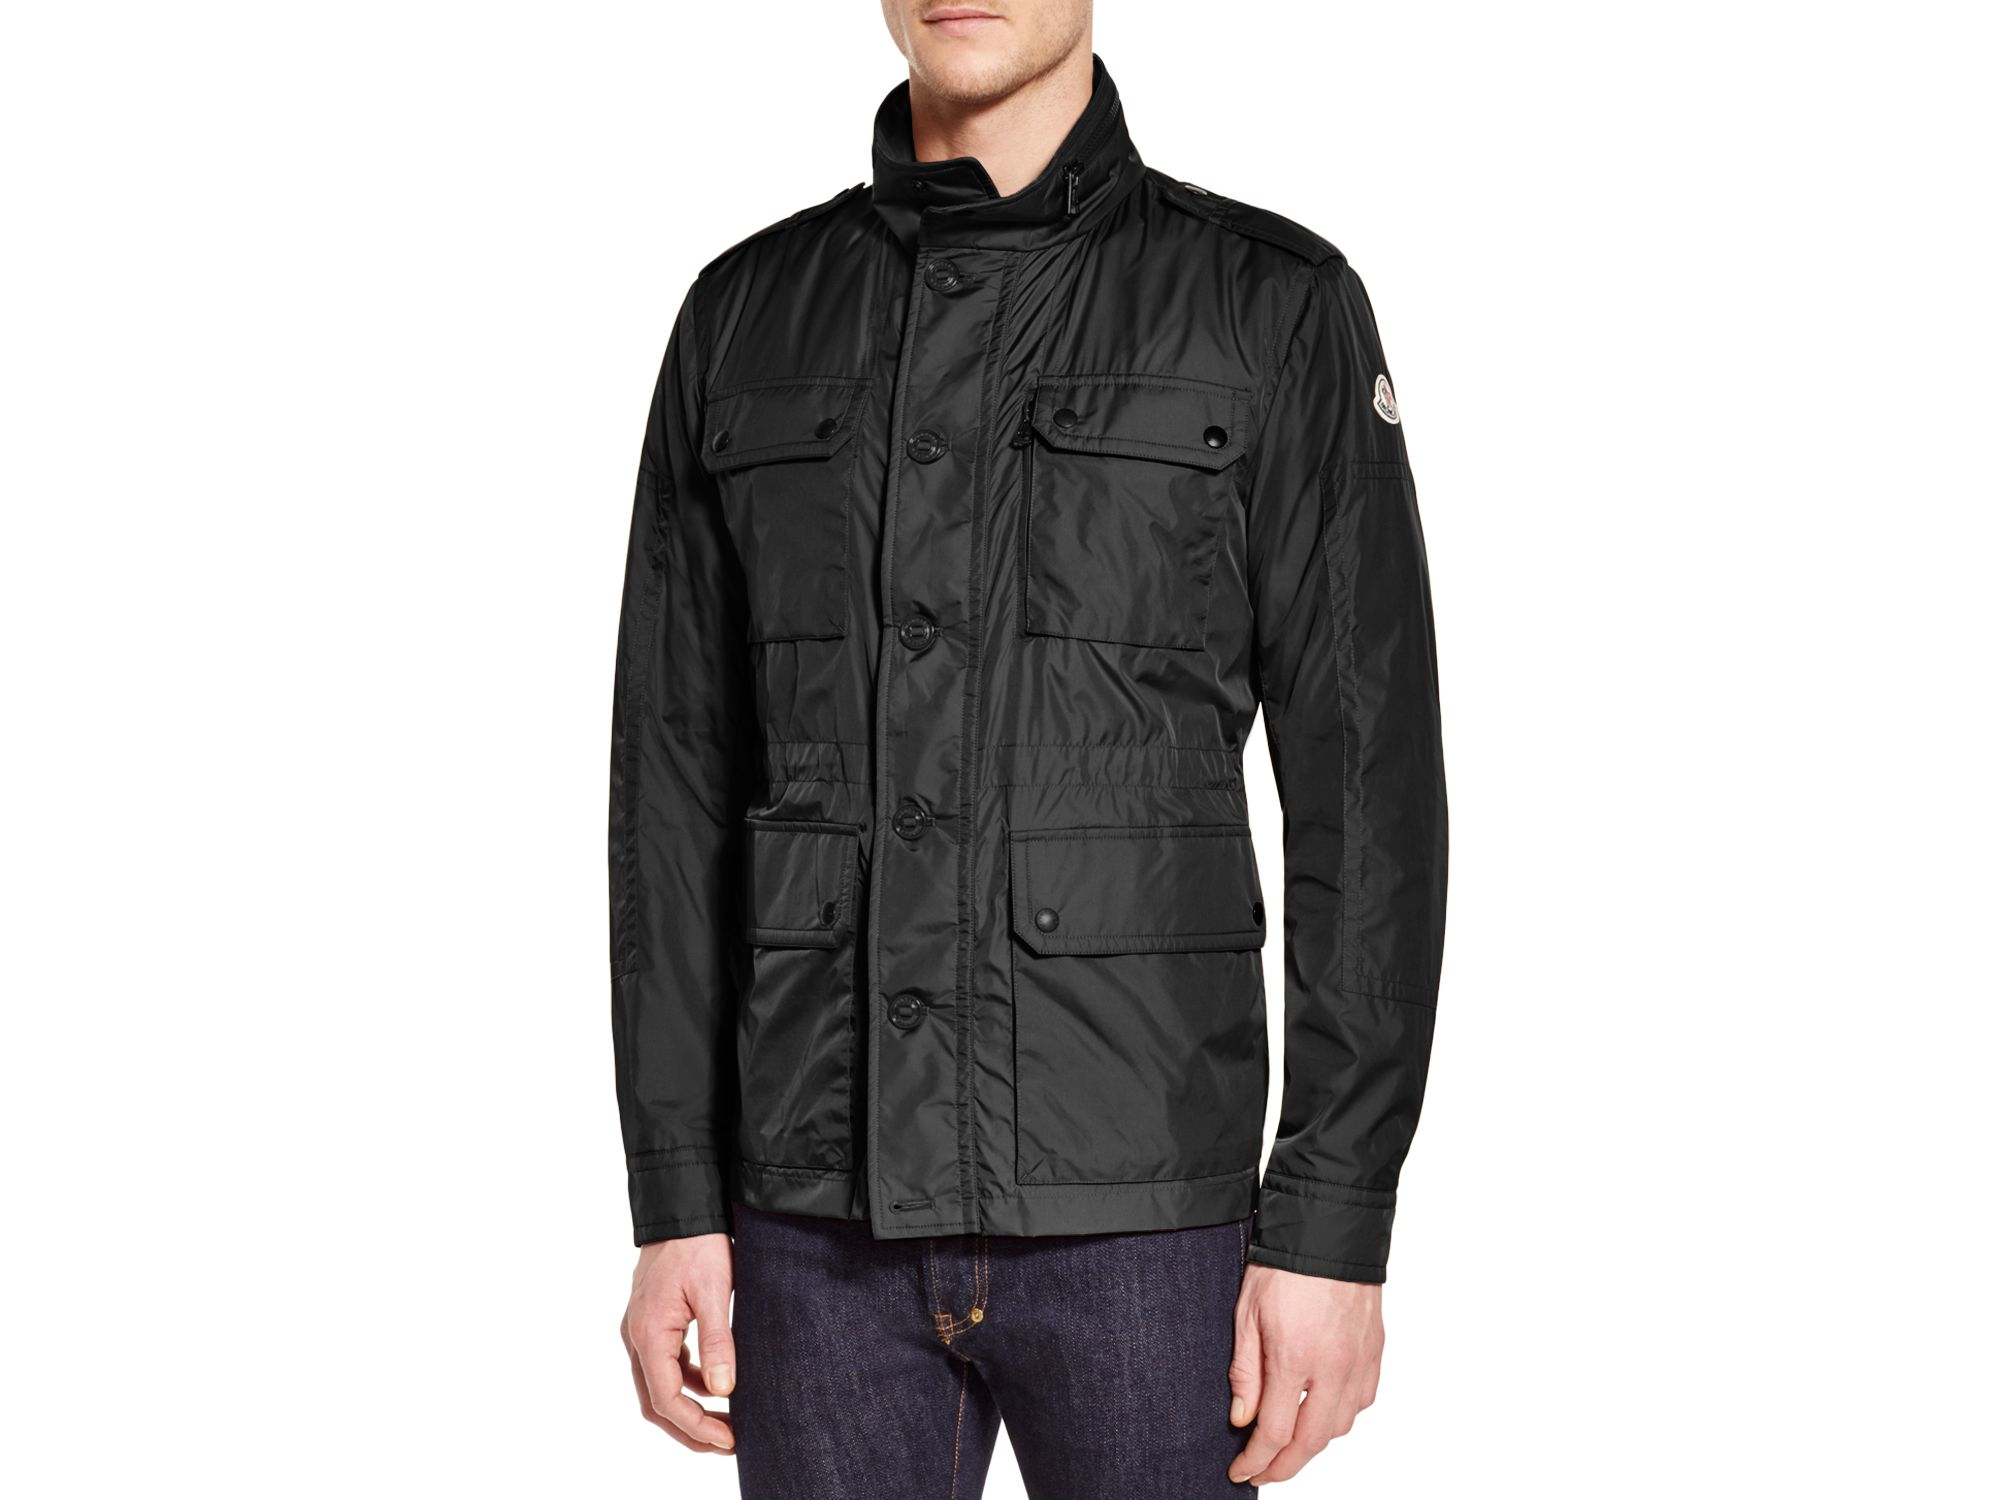 moncler cristian field jacket OFF 56% - Online Shopping Site for Fashion &  Lifestyle.